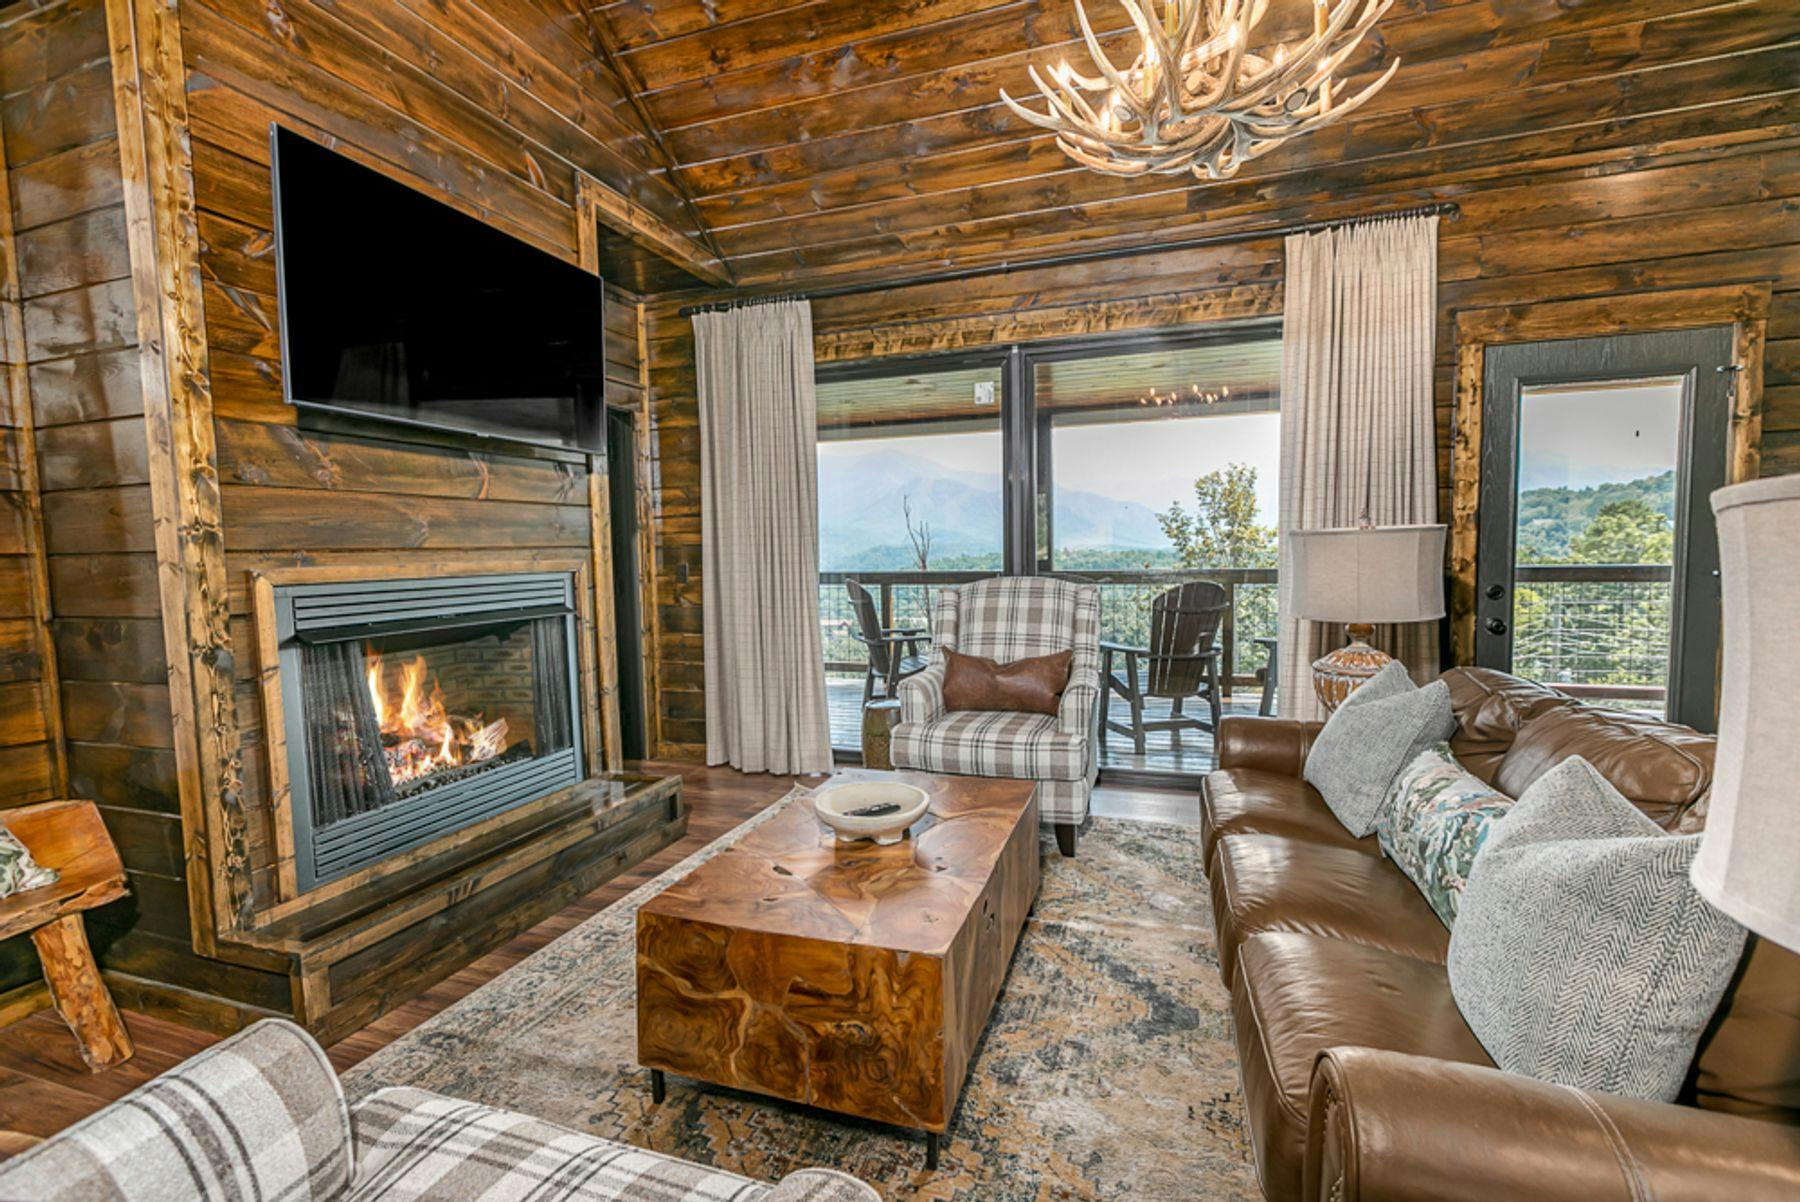 Fireplace in cabin with view